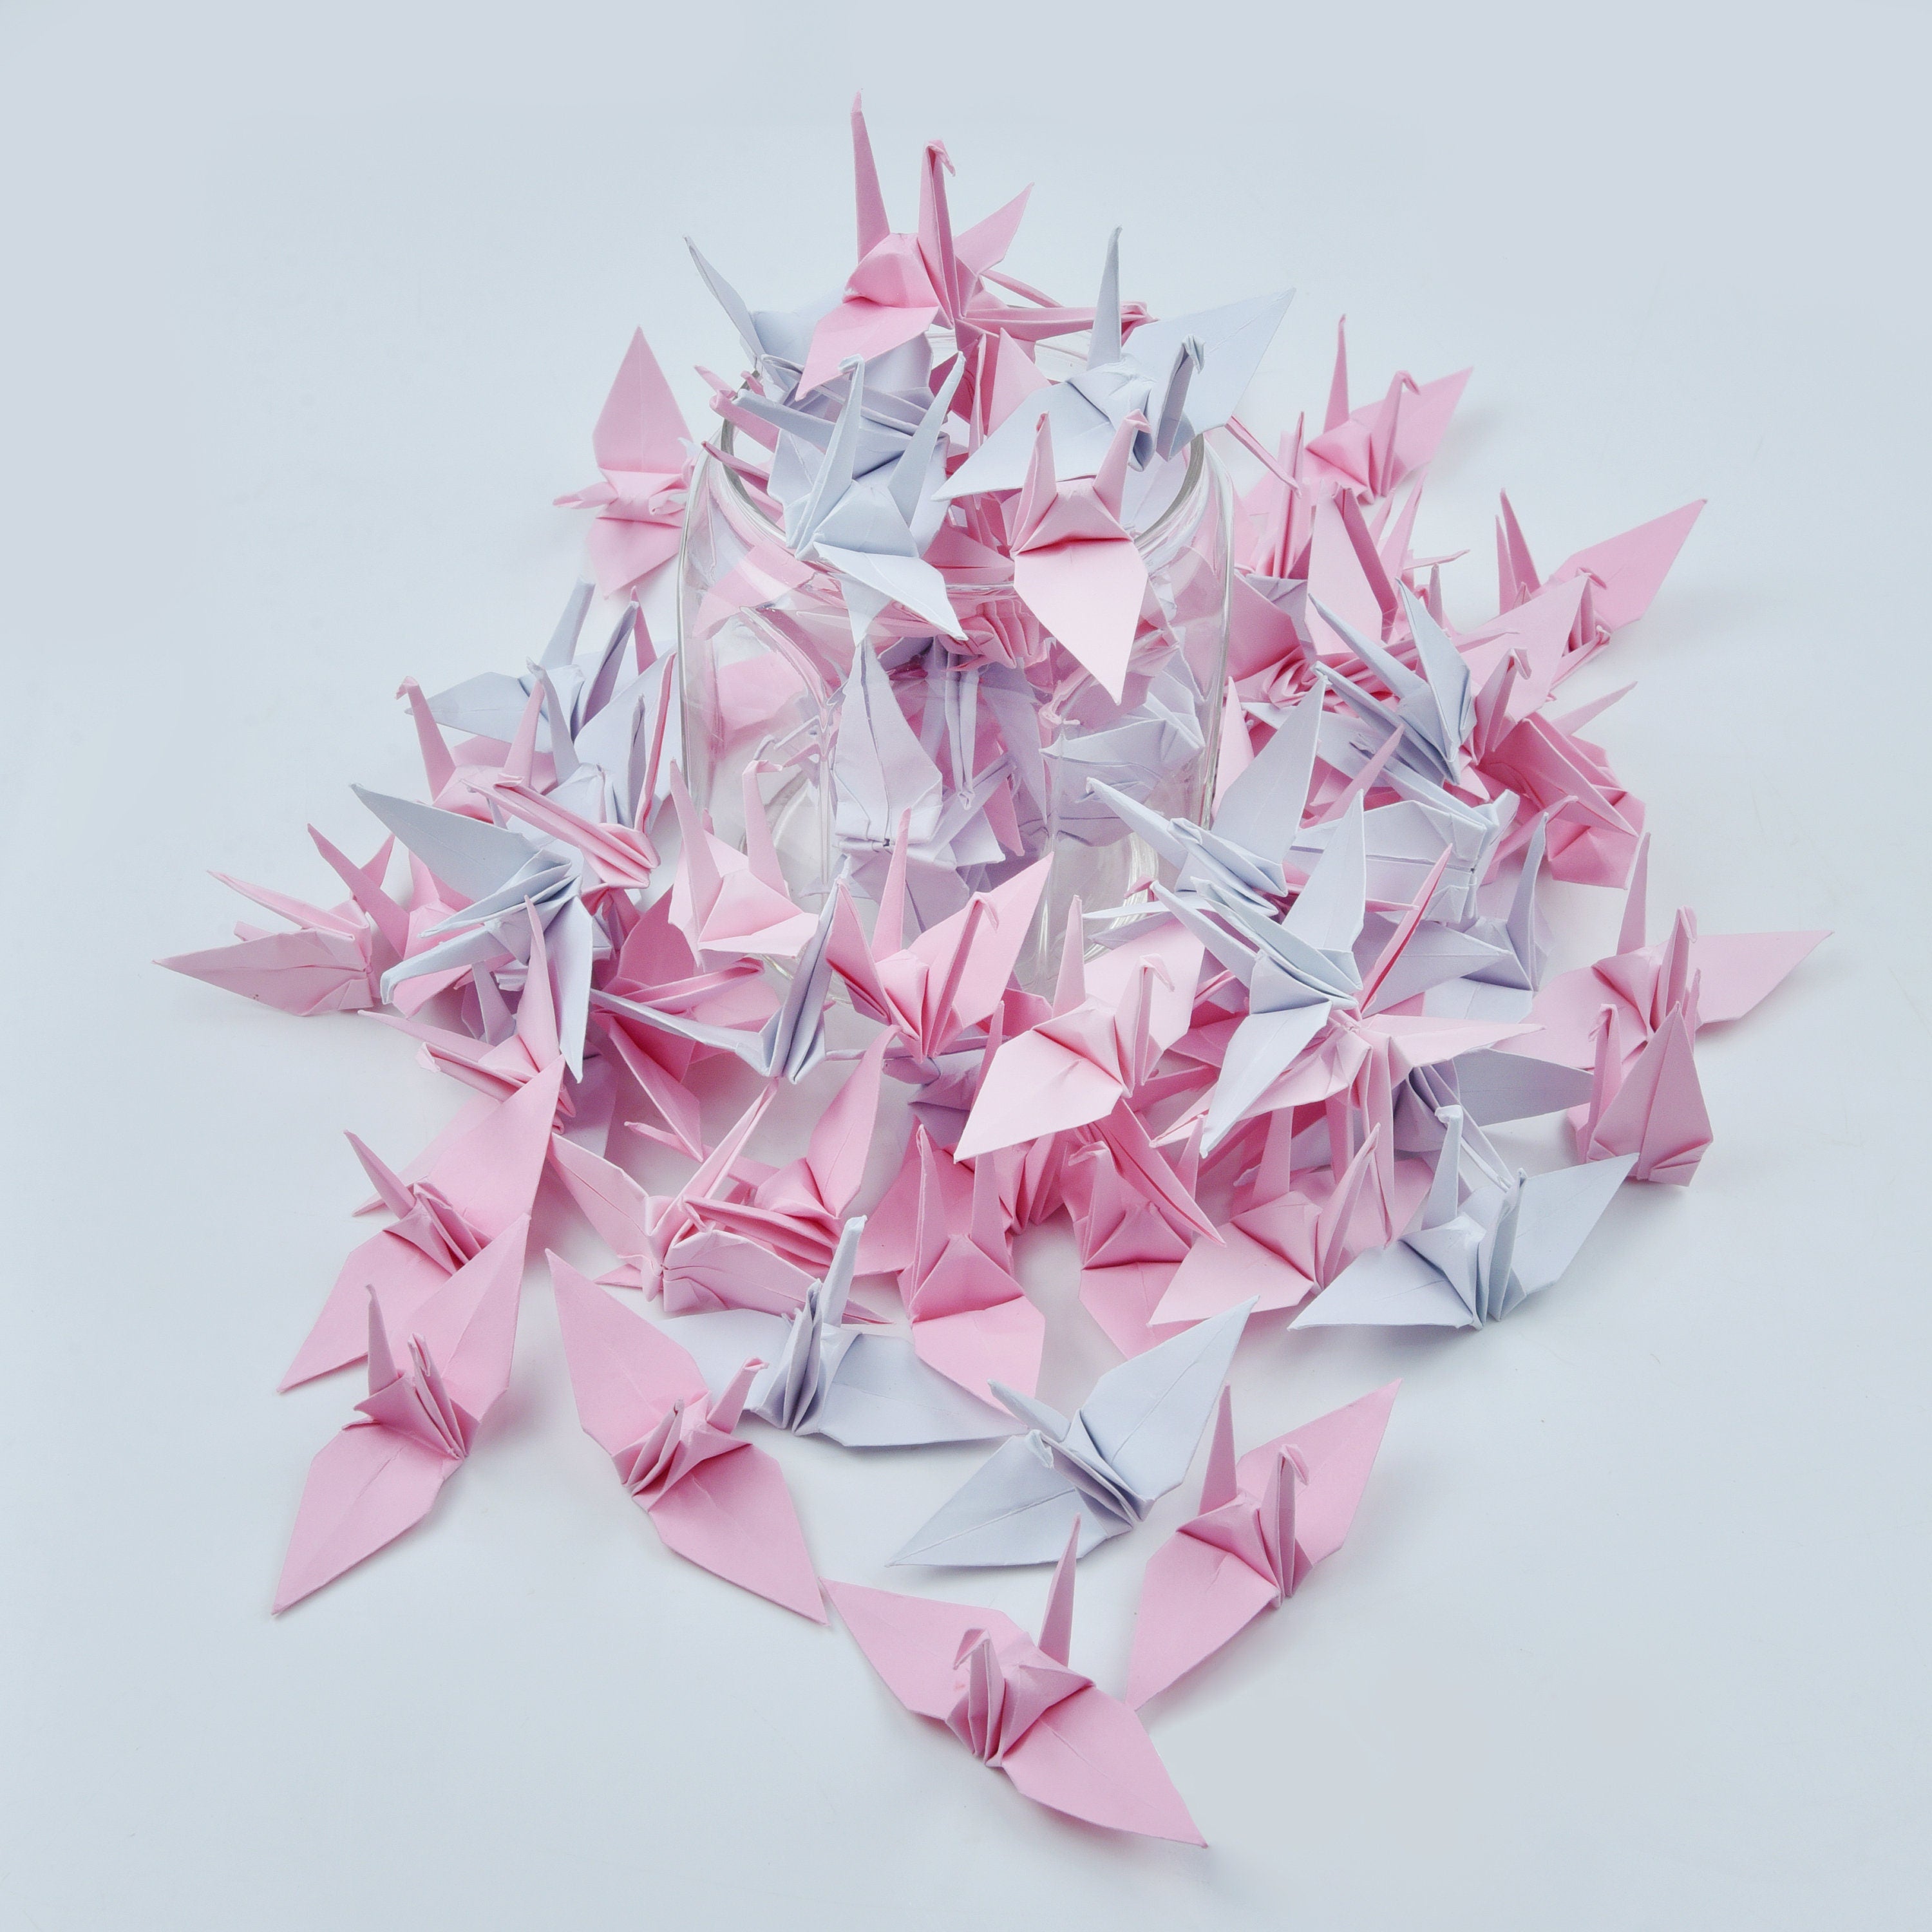 1000 Origami Paper Cranes Pink Shade Tone Made of 7.5cm (3x3 inches)